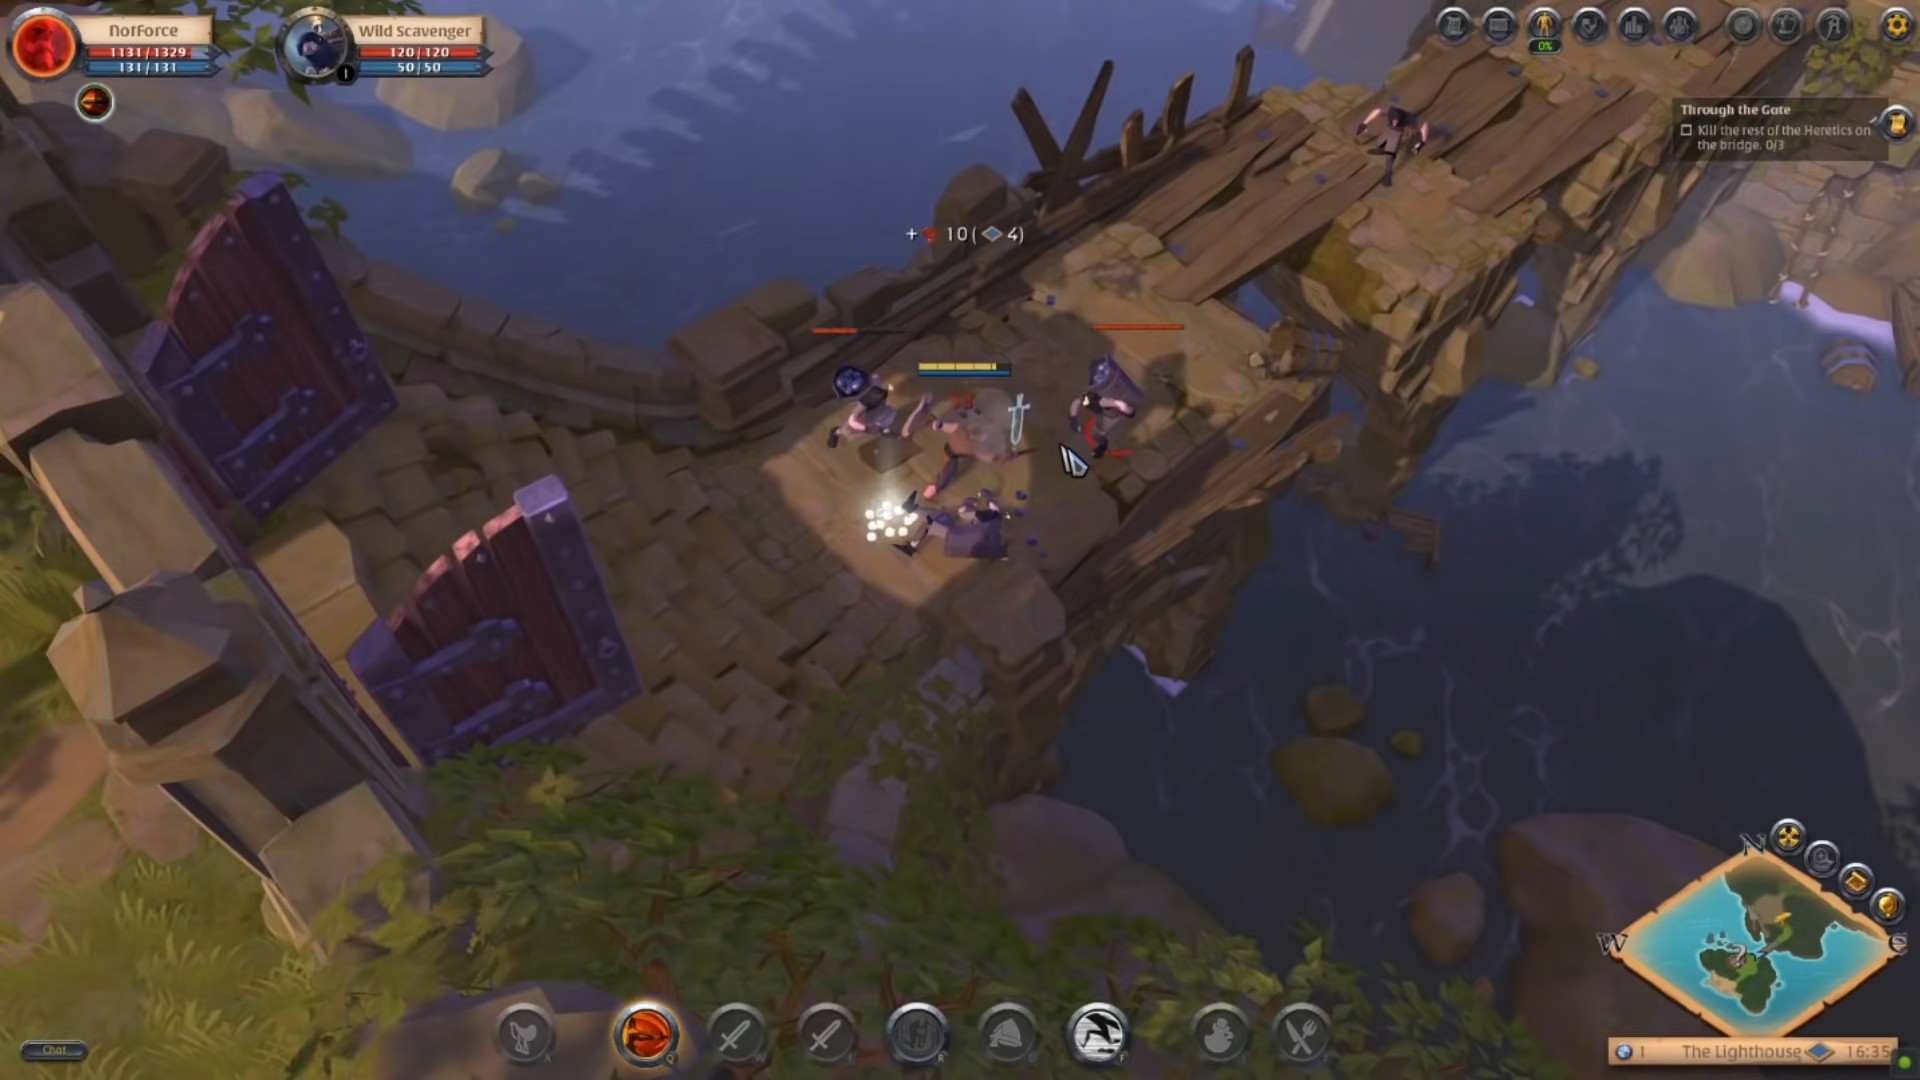 Well Played Albion Online. HD Graphics included : r/MMORPG